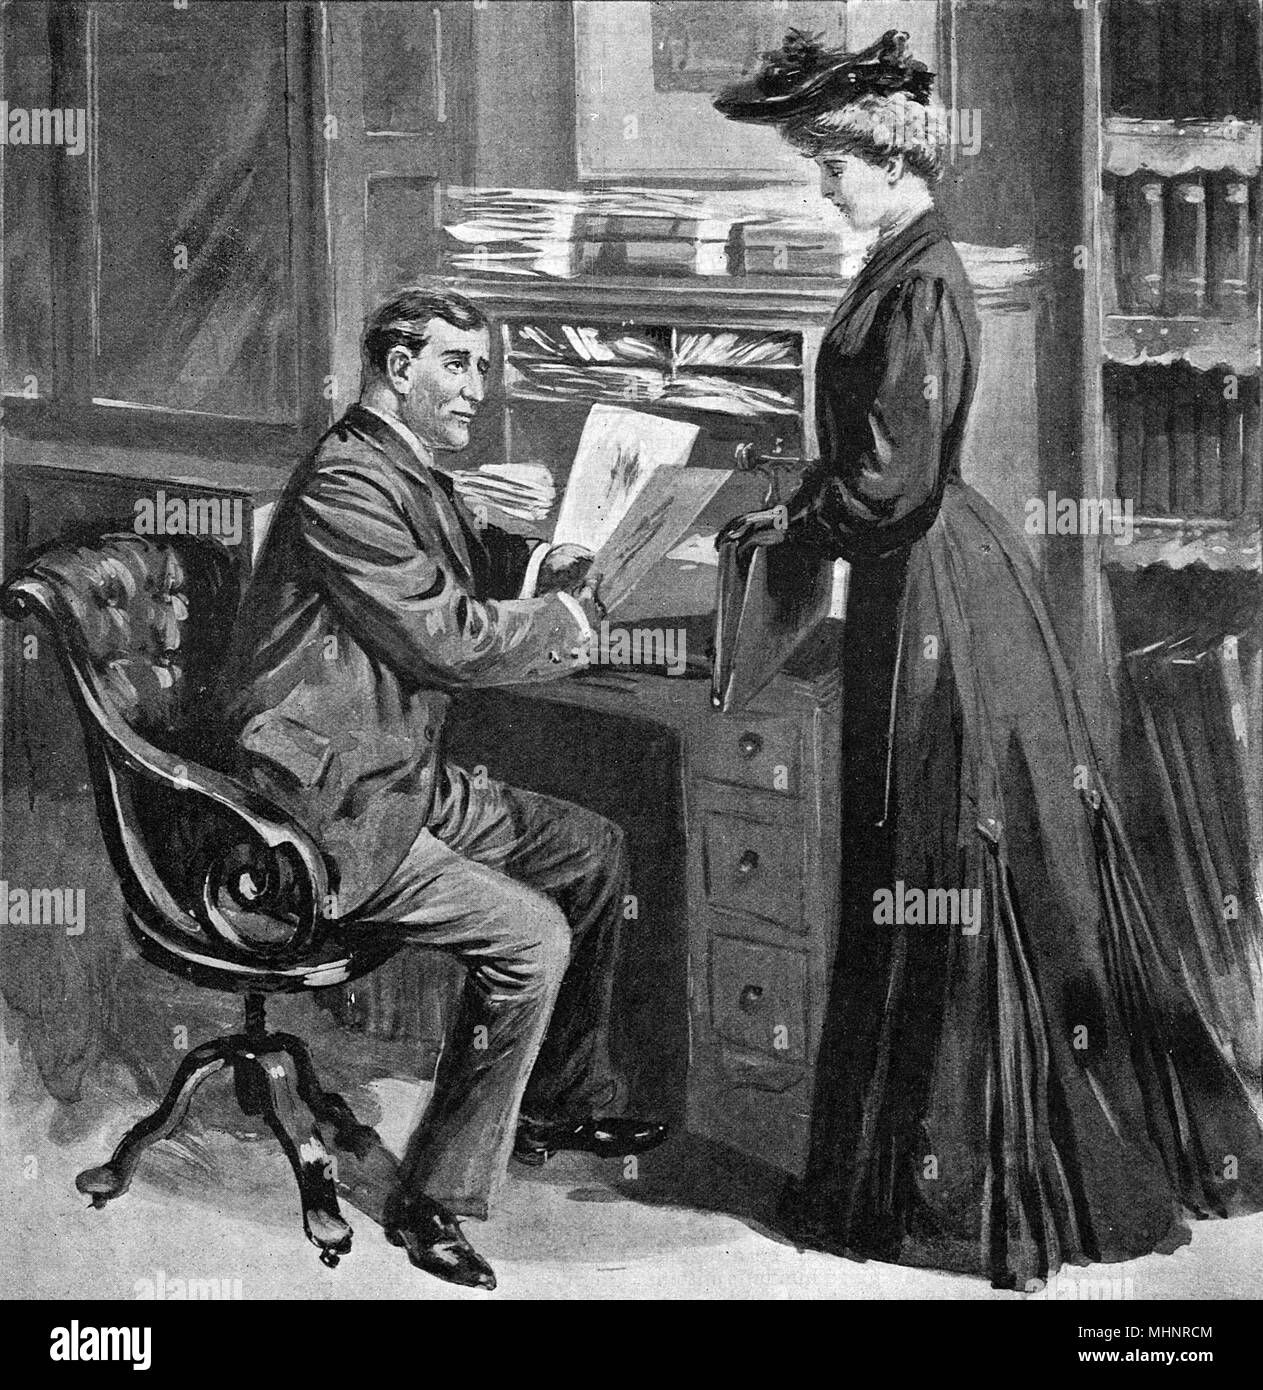 A female artist presents her portfolio, perhaps to an editor of an illustrated magazine.       Date: 1906 Stock Photo